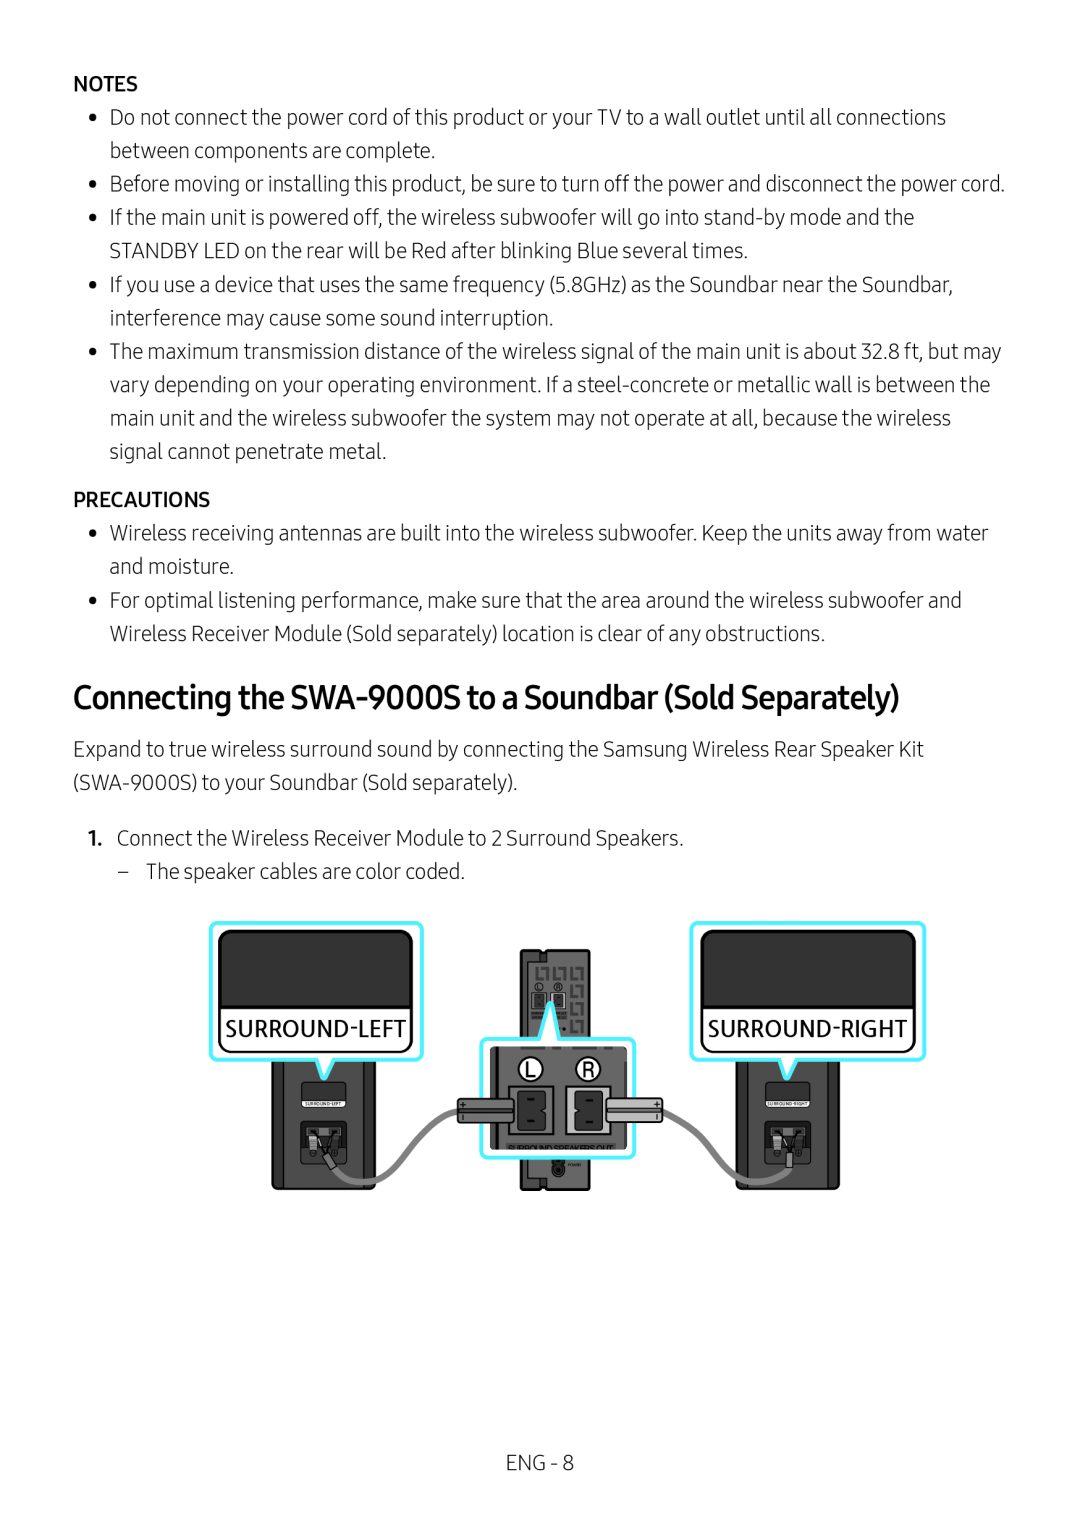 Connecting the SWA-9000Sto a Soundbar (Sold Separately) Dolby Atmos HW-N850